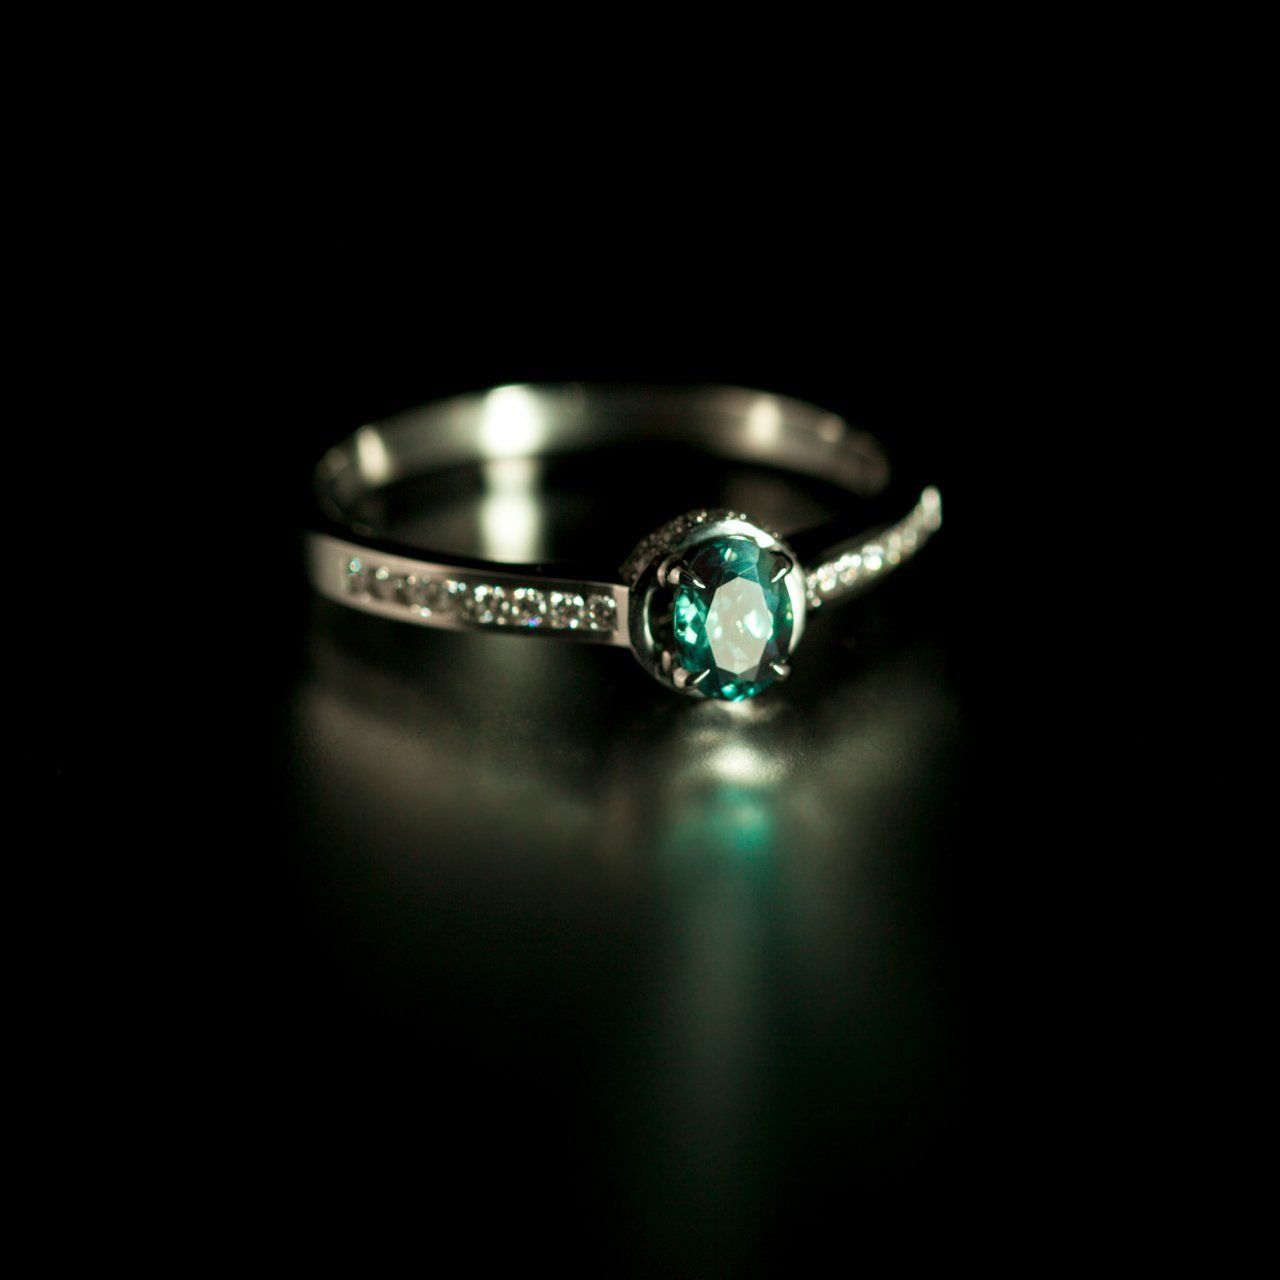 18k white gold ring with a 0.55ct blue-green alexandrite and diamond detailing